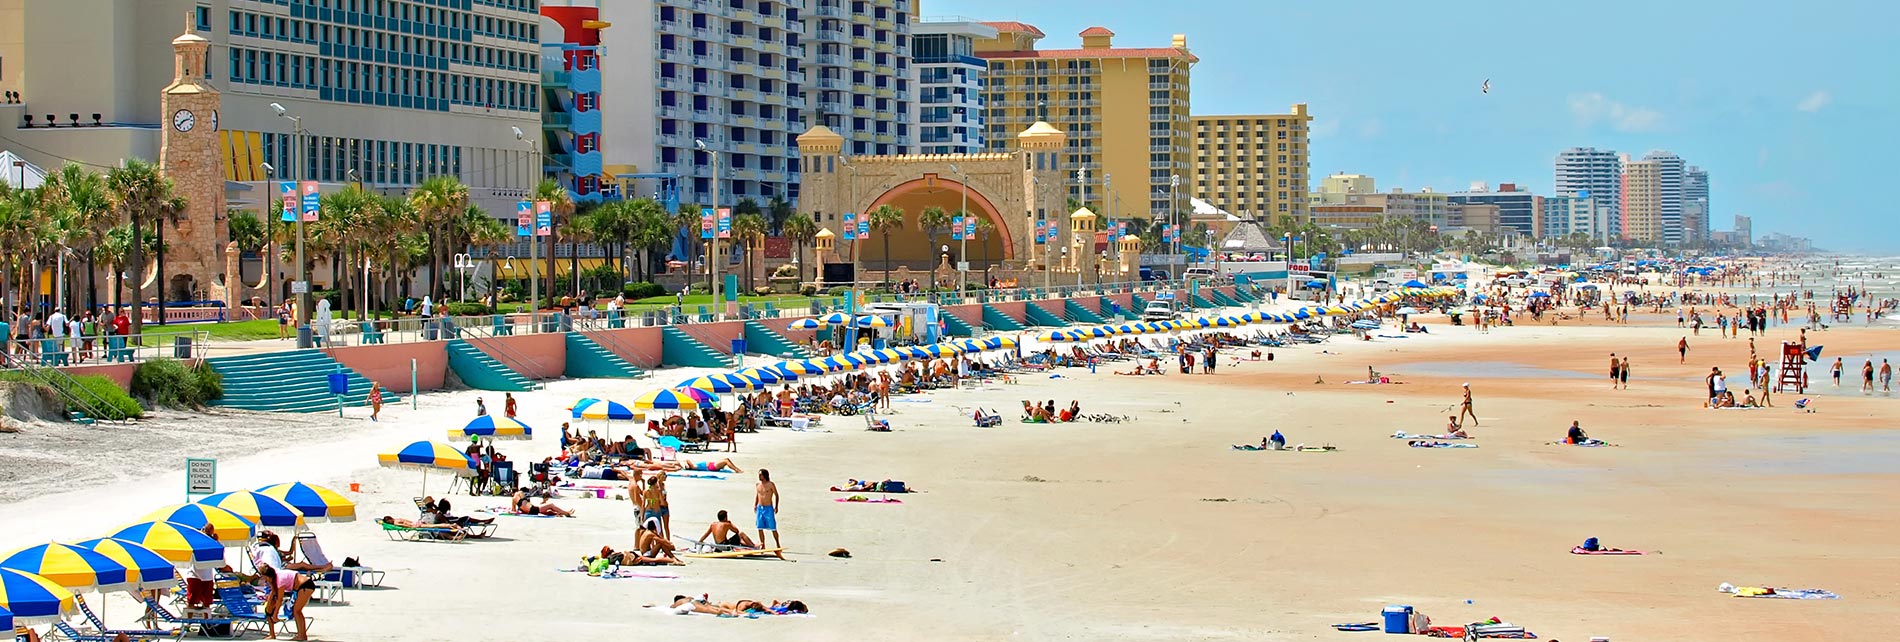 Enjoying the beach and other things to do in Daytona Beach